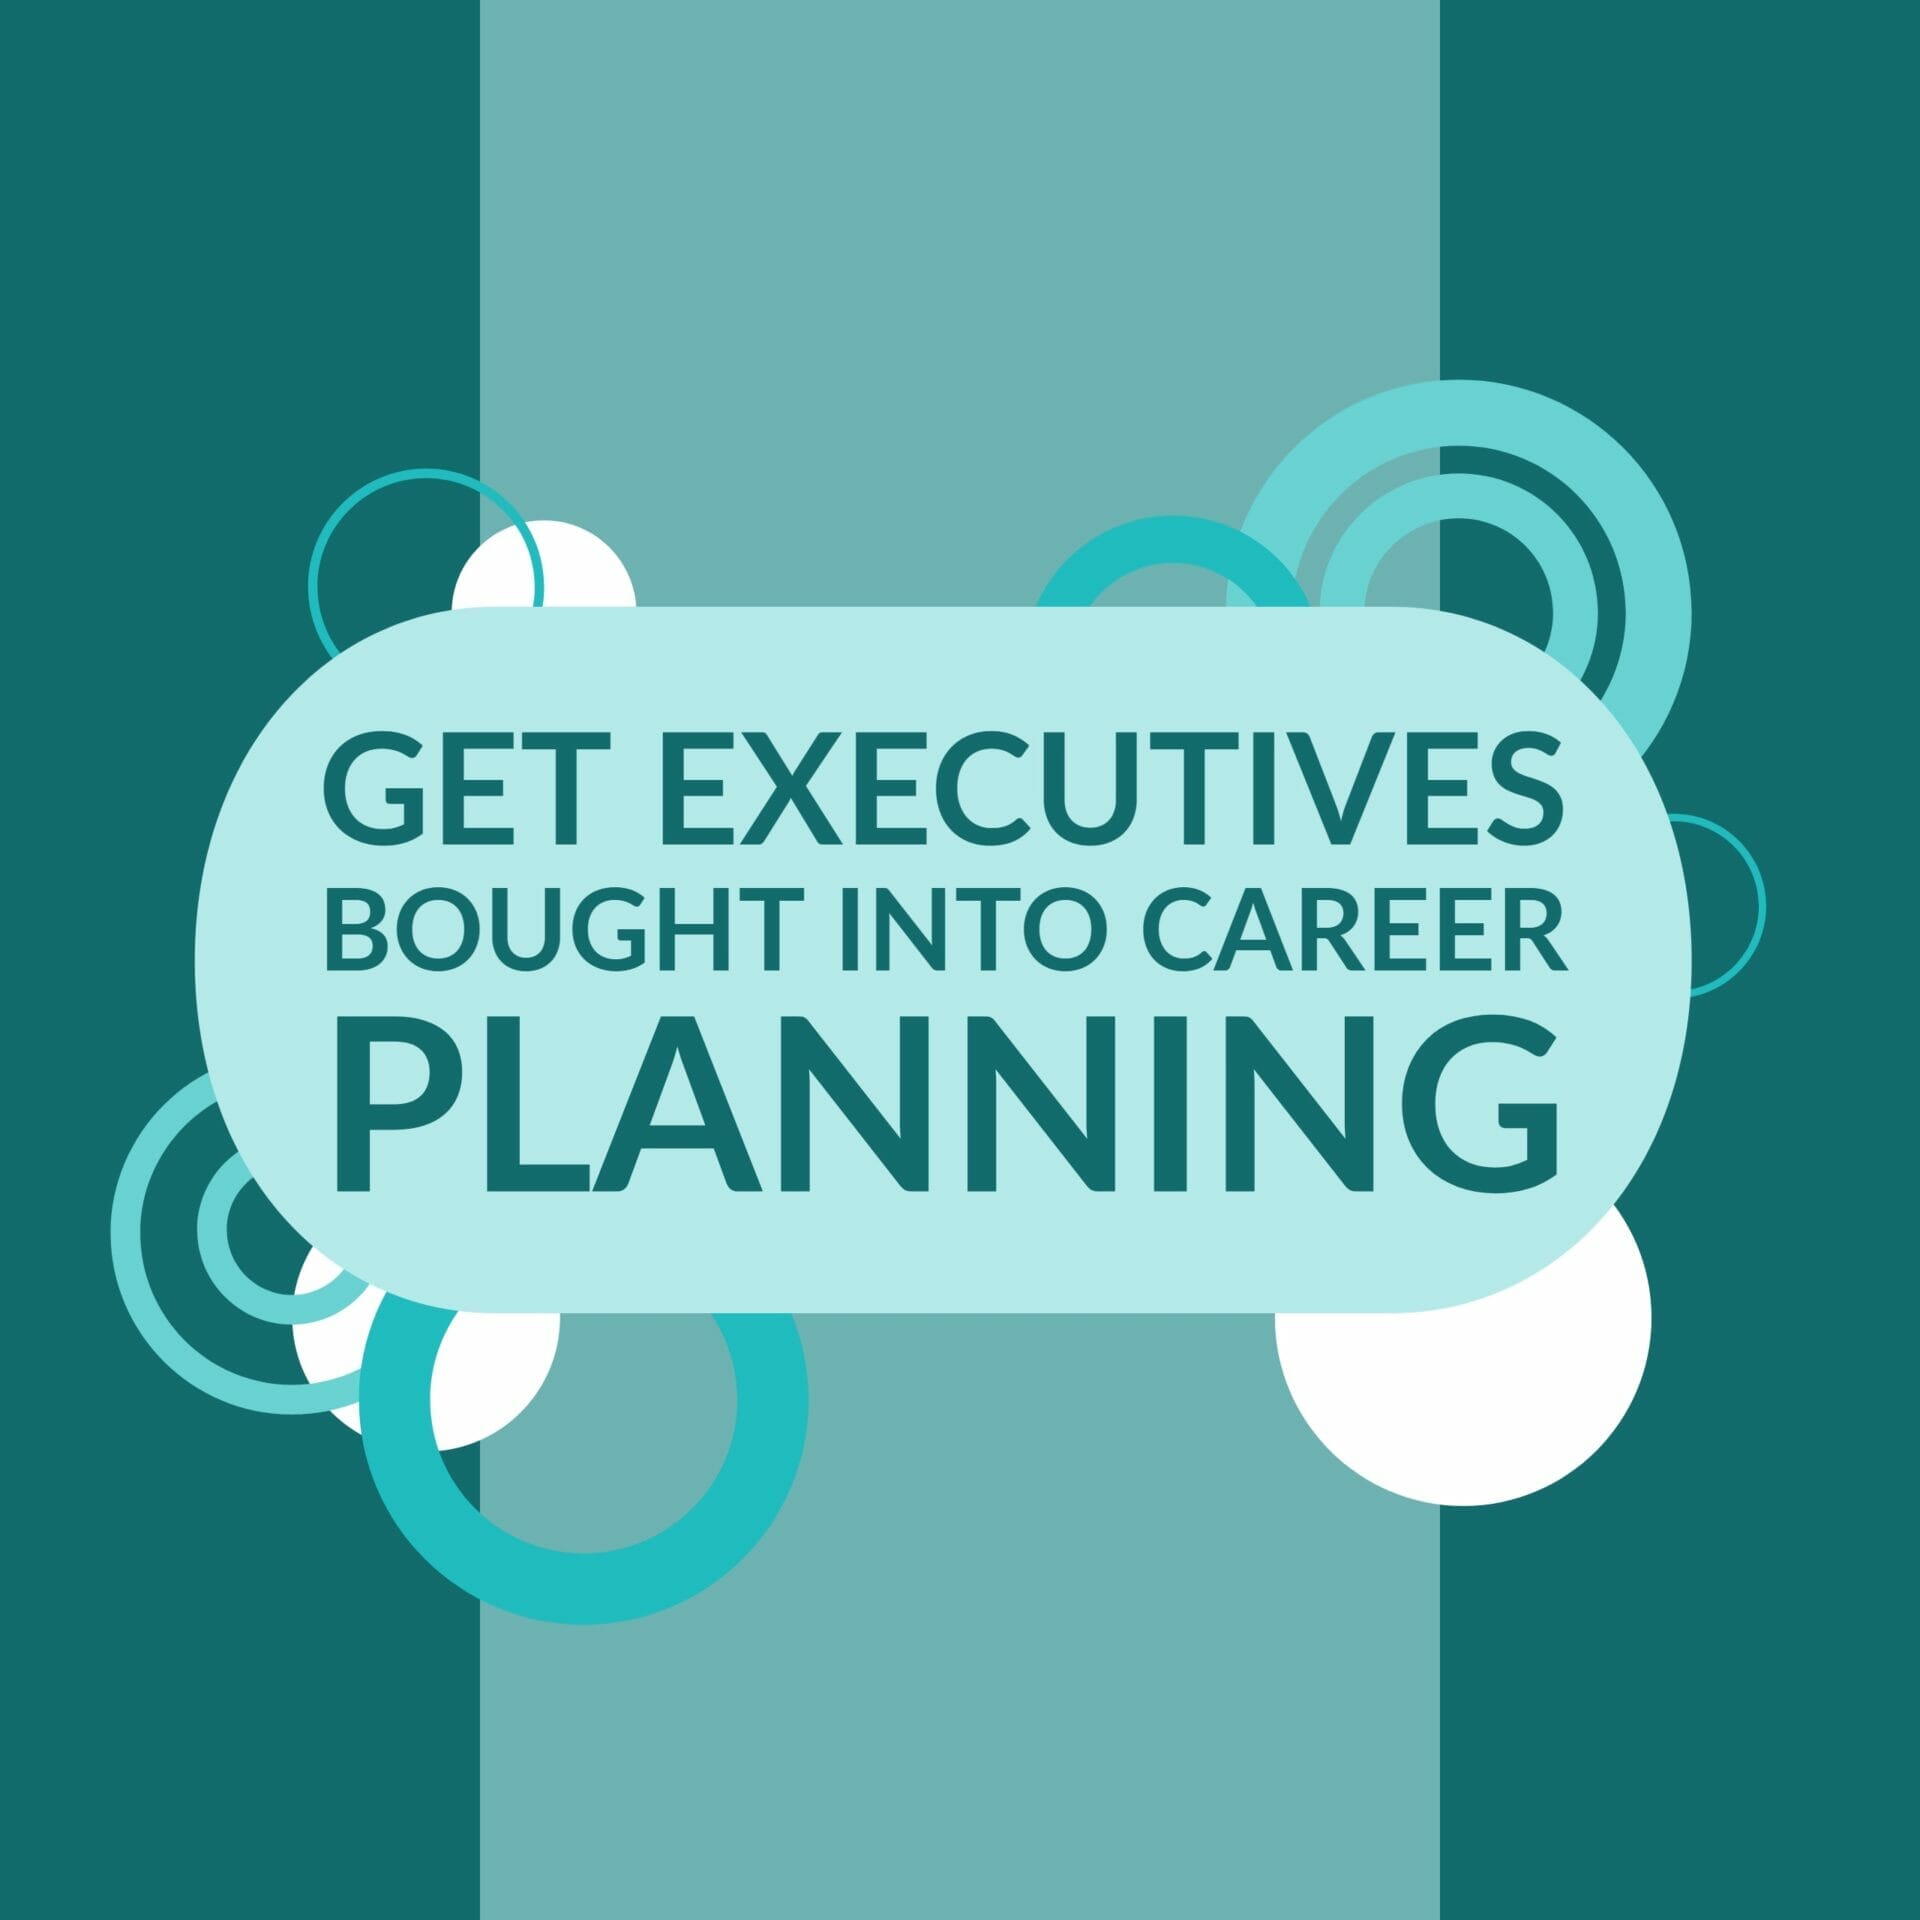 Winning Executive Support for Career Planning - TalentGuard